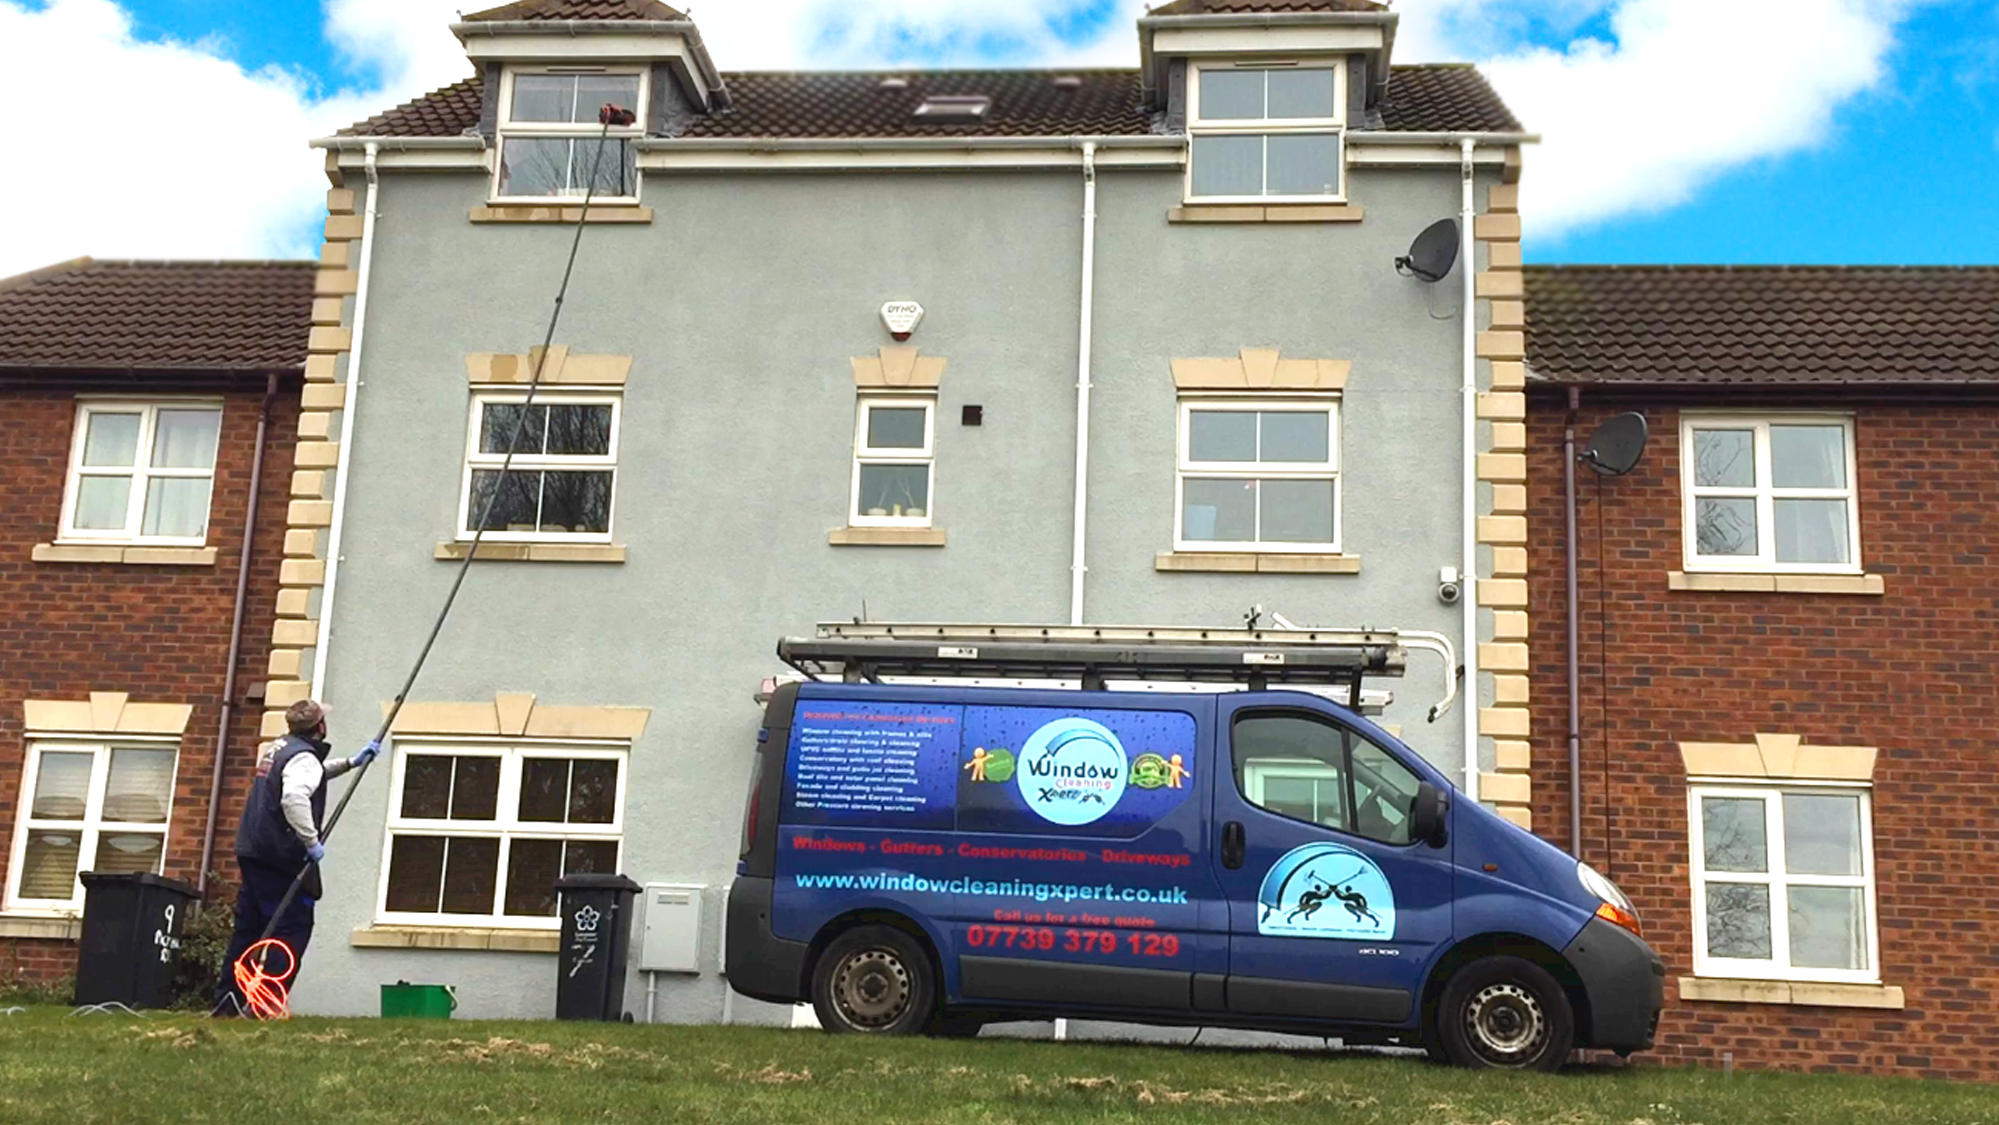 Domestic Window Cleaning near me